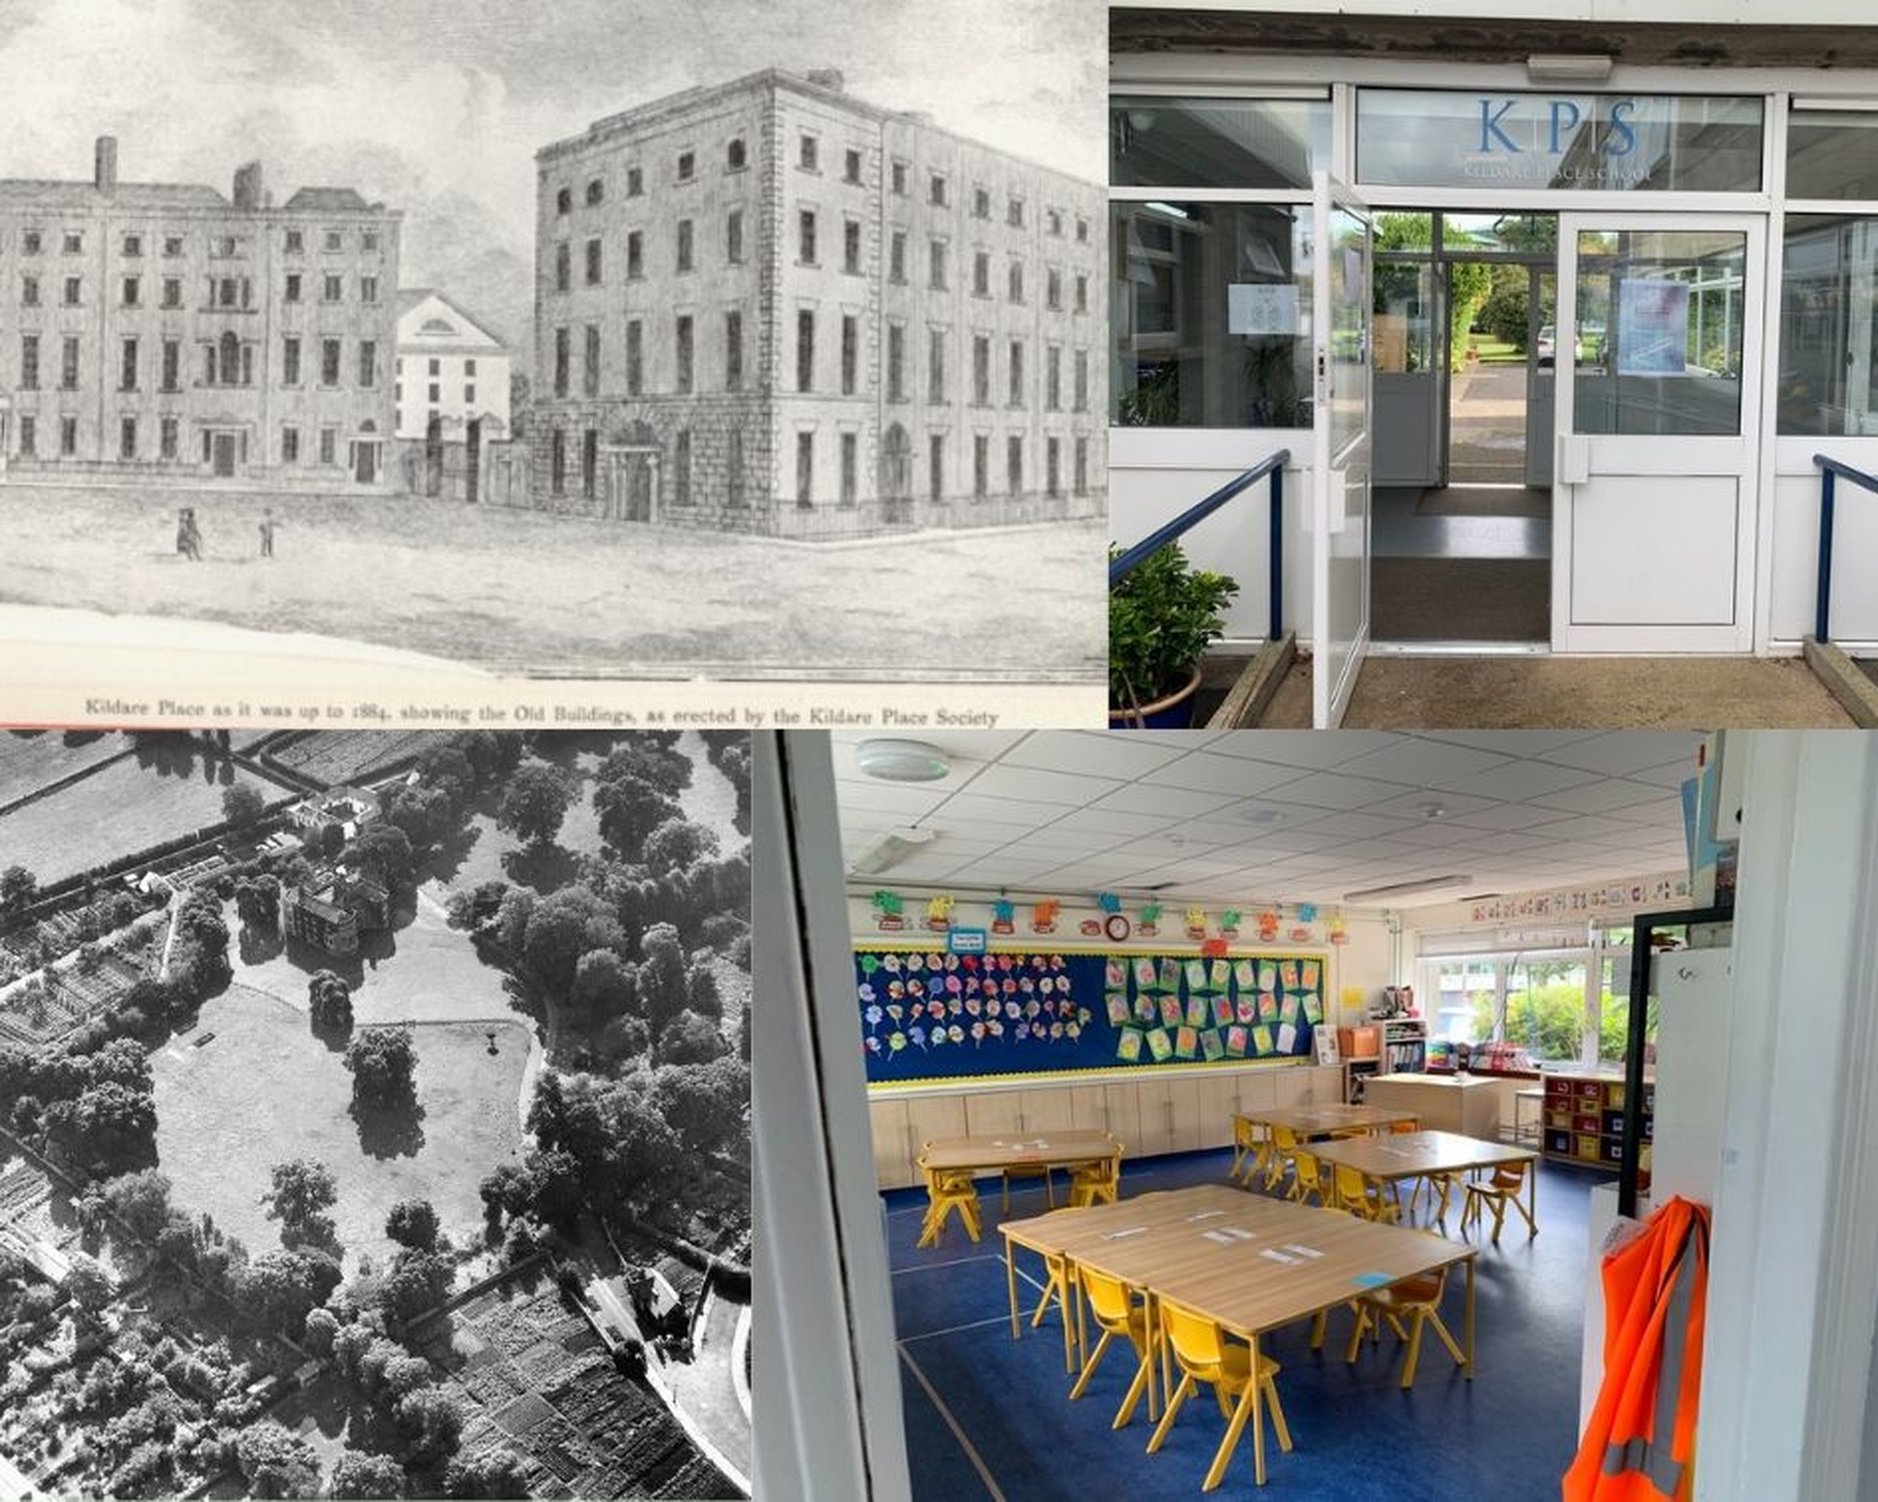 Kildare Place School – Celebrating 50 years in Rathmines and 200 Years